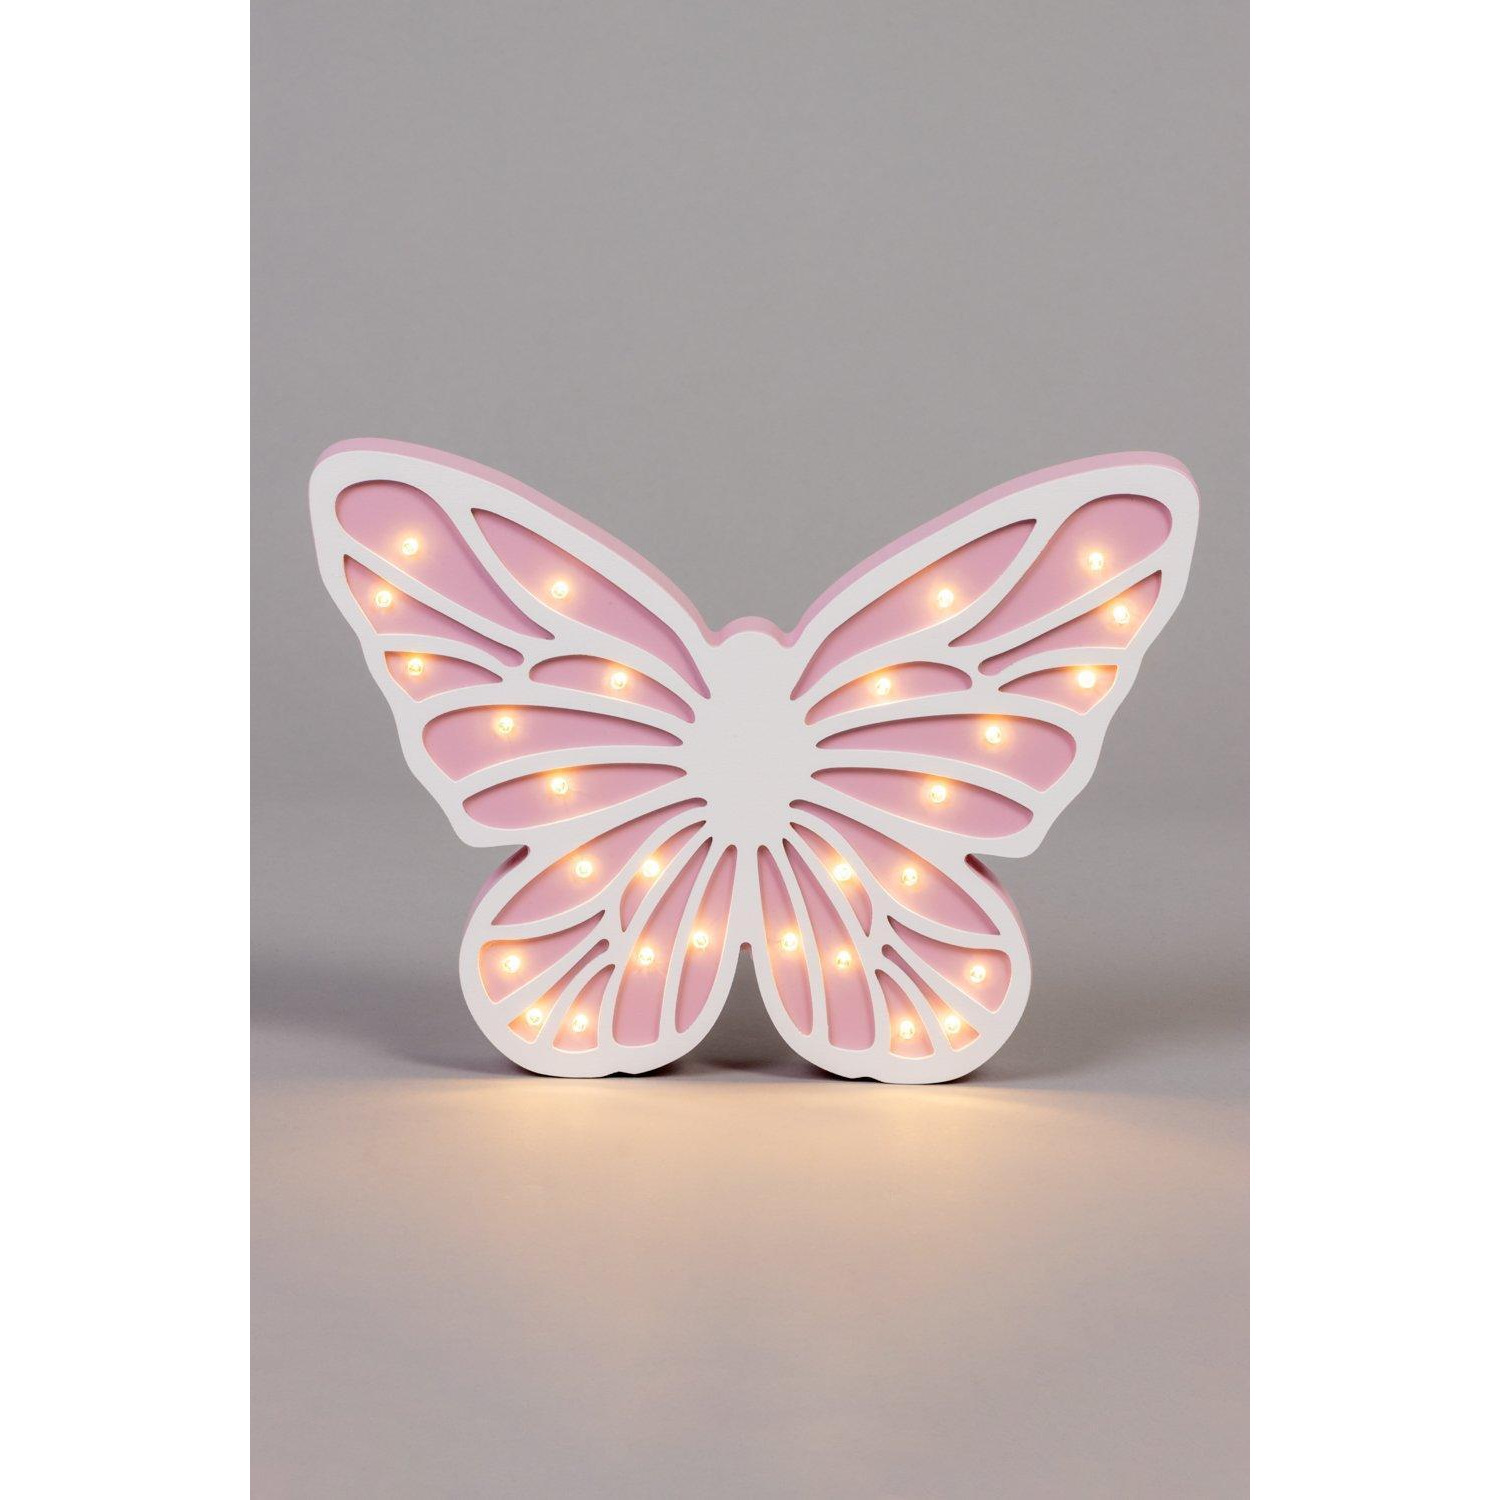 Glow Butterfly Table Lamp - image 1